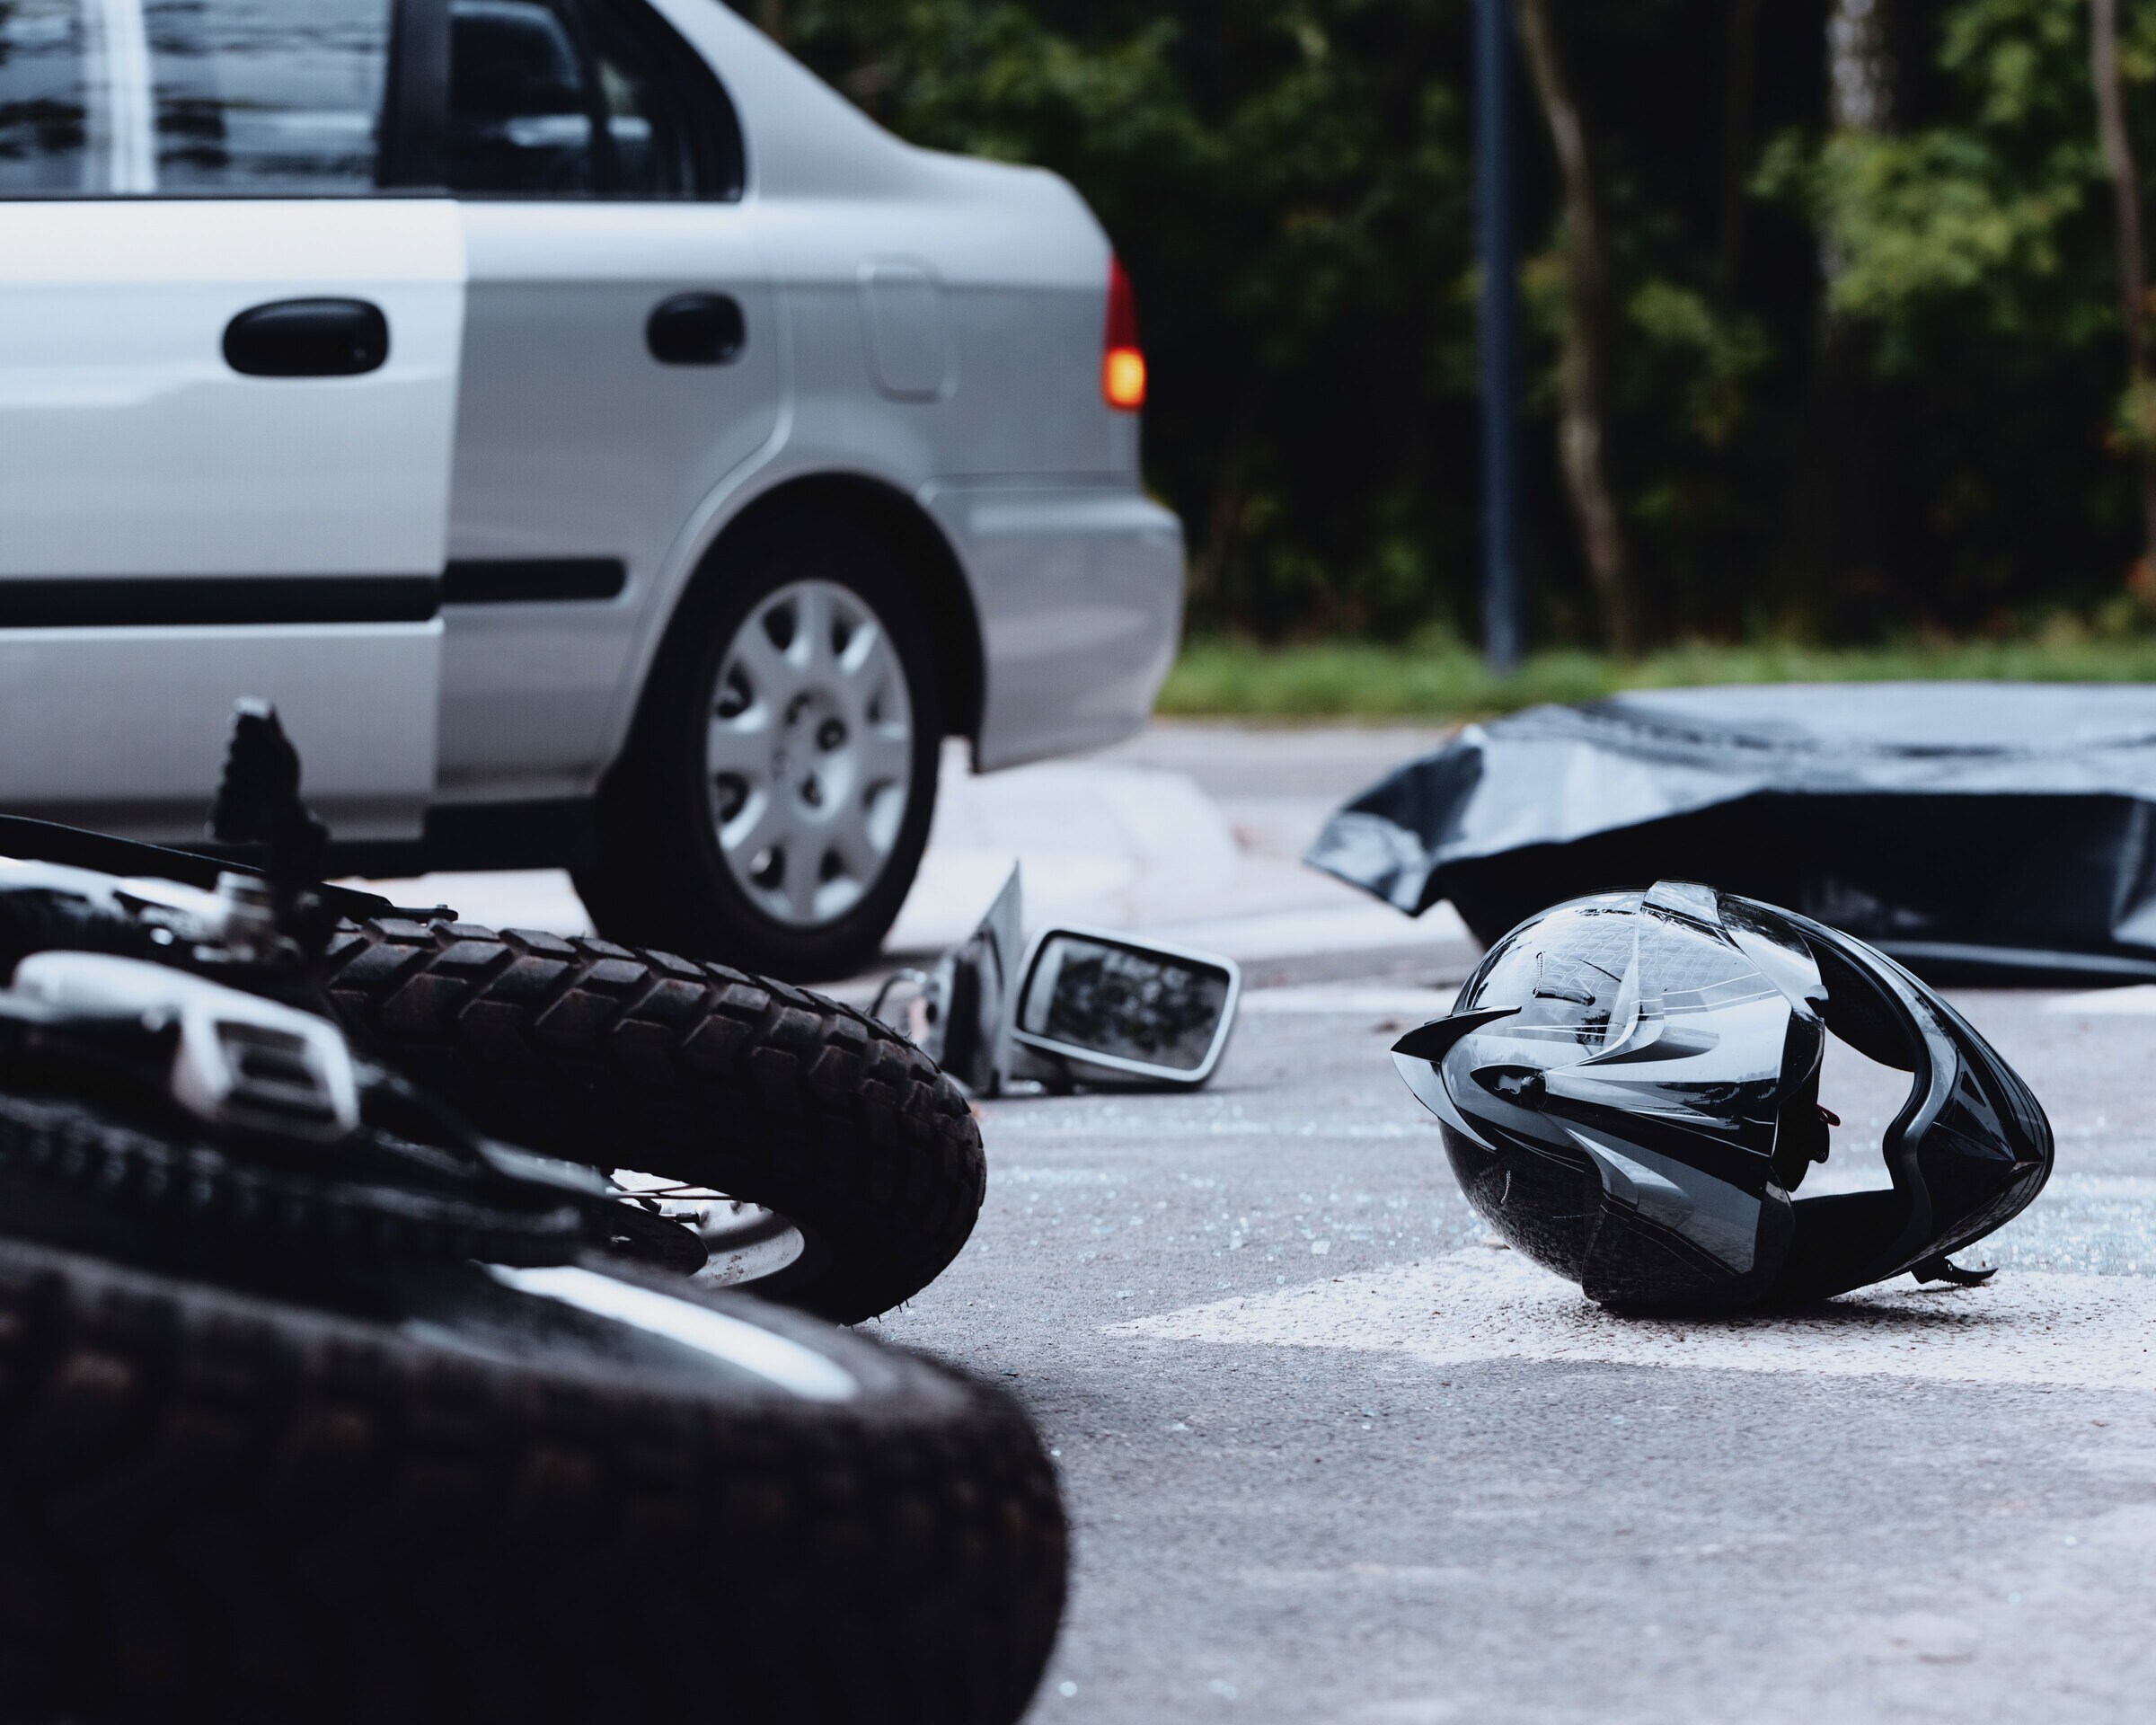 Reliable lawyers who are dedicated to providing support and guidance to those affected by car and motor vehicle accidents in Lakeland